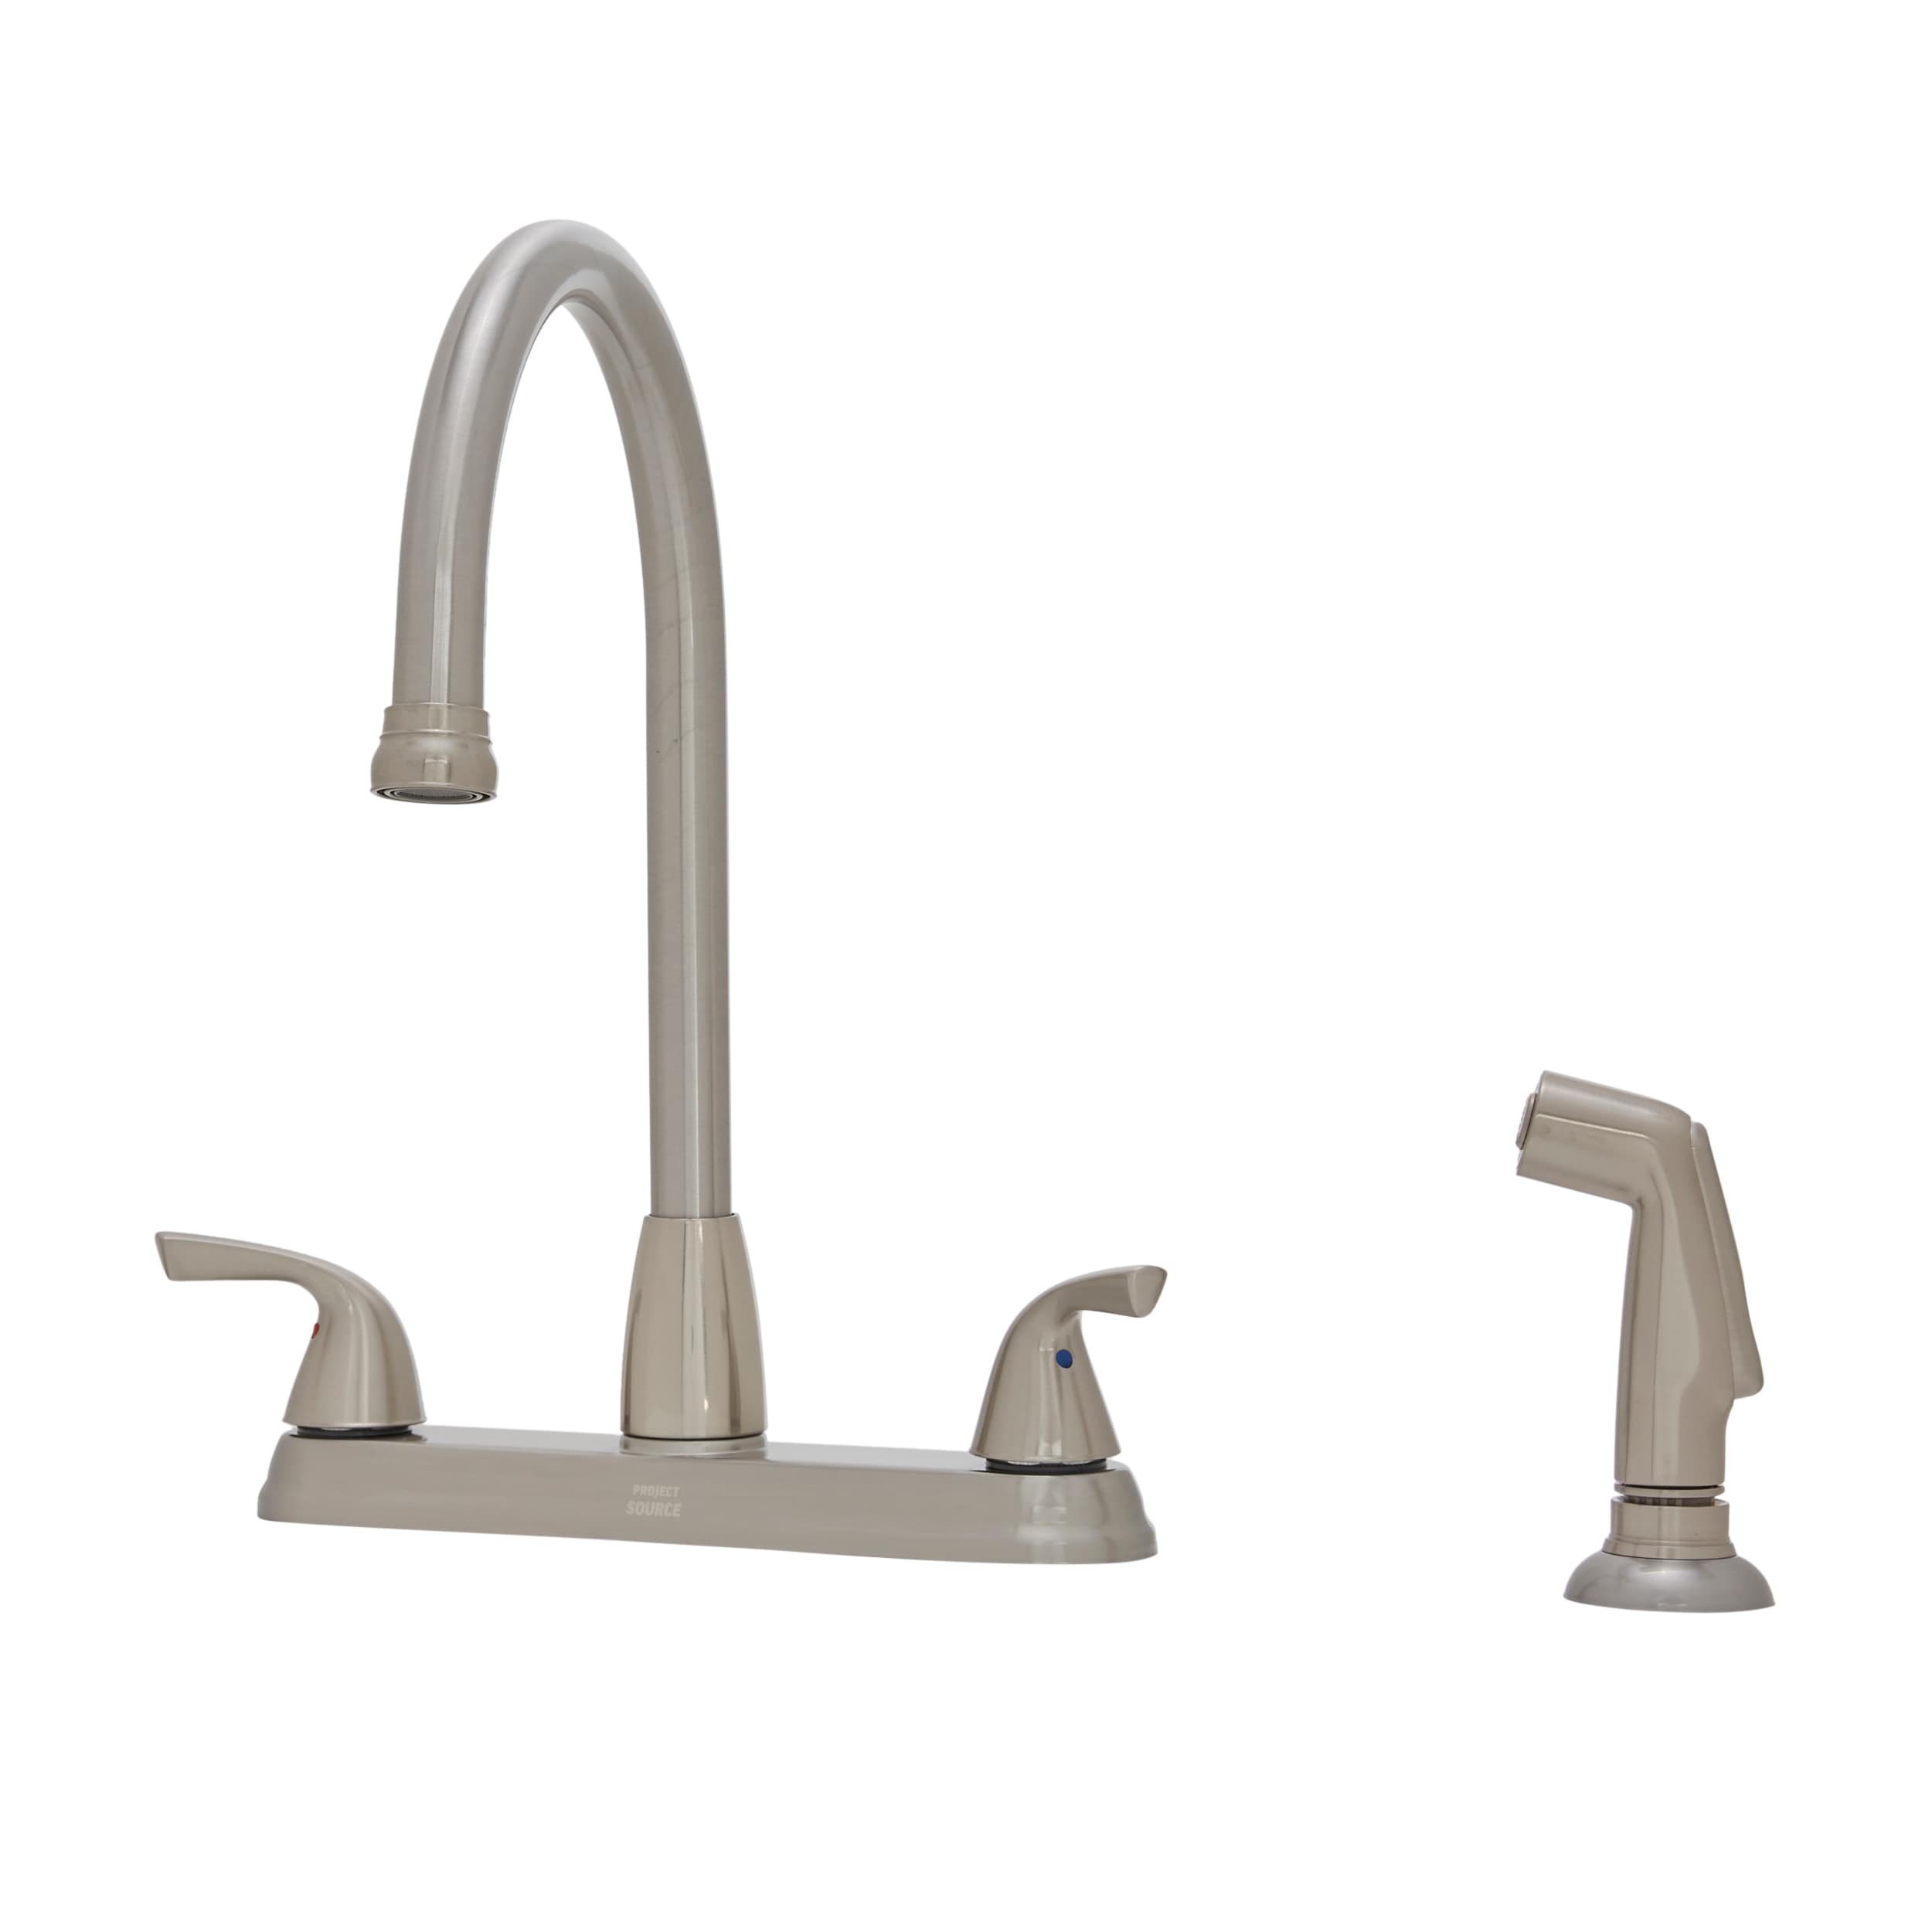 Builders Stainless Steel Standard Kitchen Faucet 2-Handle Wall Mount High-Arc 